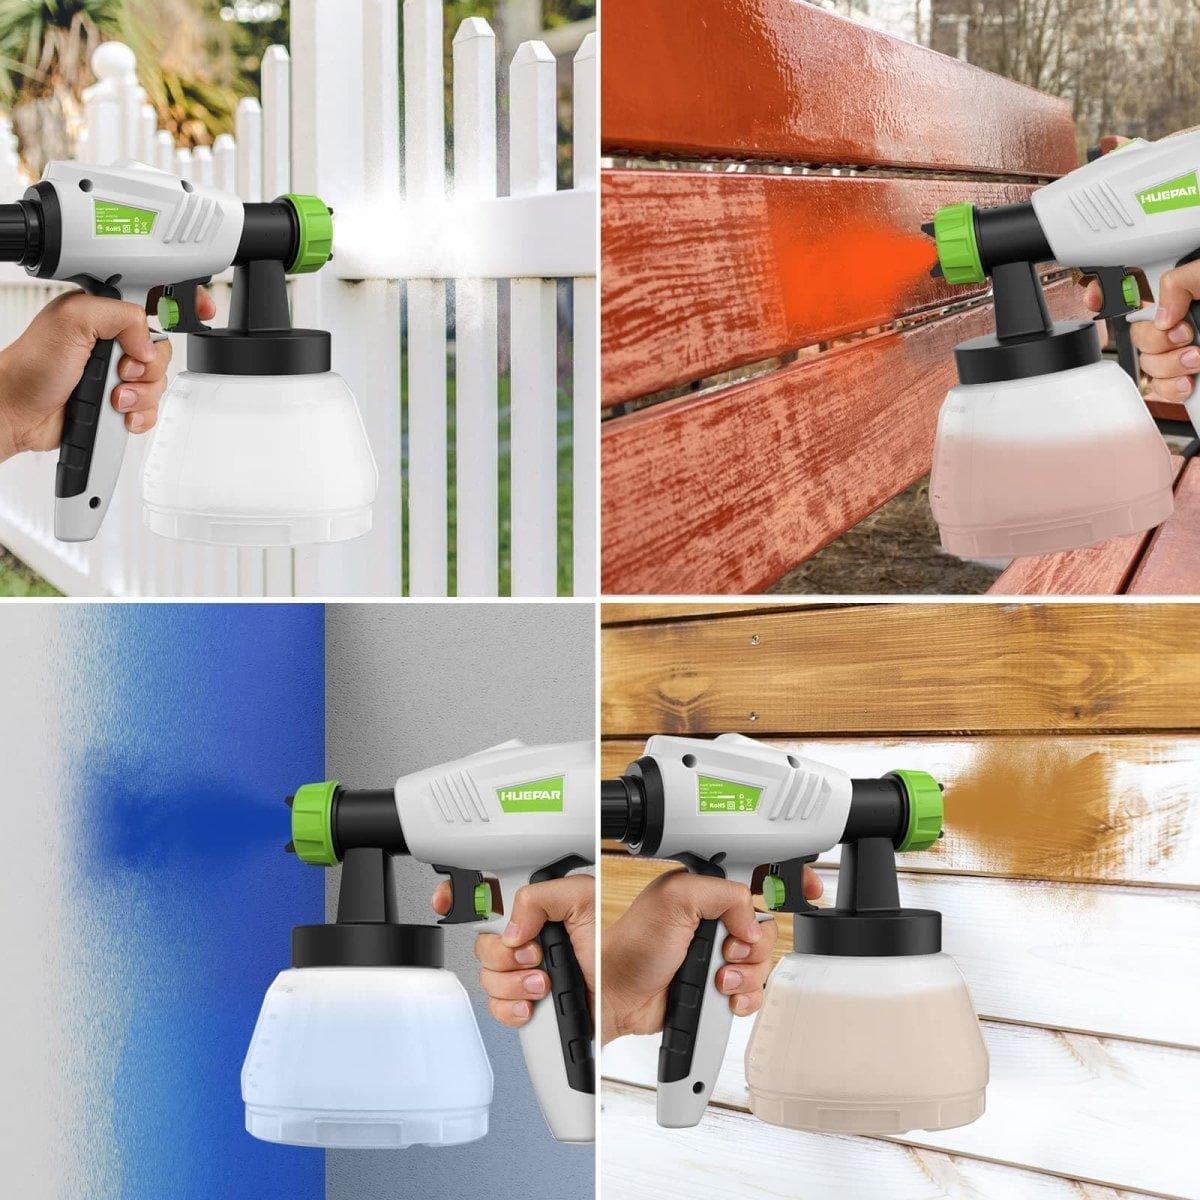 Huepar Tools SG800 HVLP electric paint sprayer with 4 metal nozzles and 3 patterns, ideal for home interior and exterior walls, house painting, ceiling, fence, cabinet, chair6